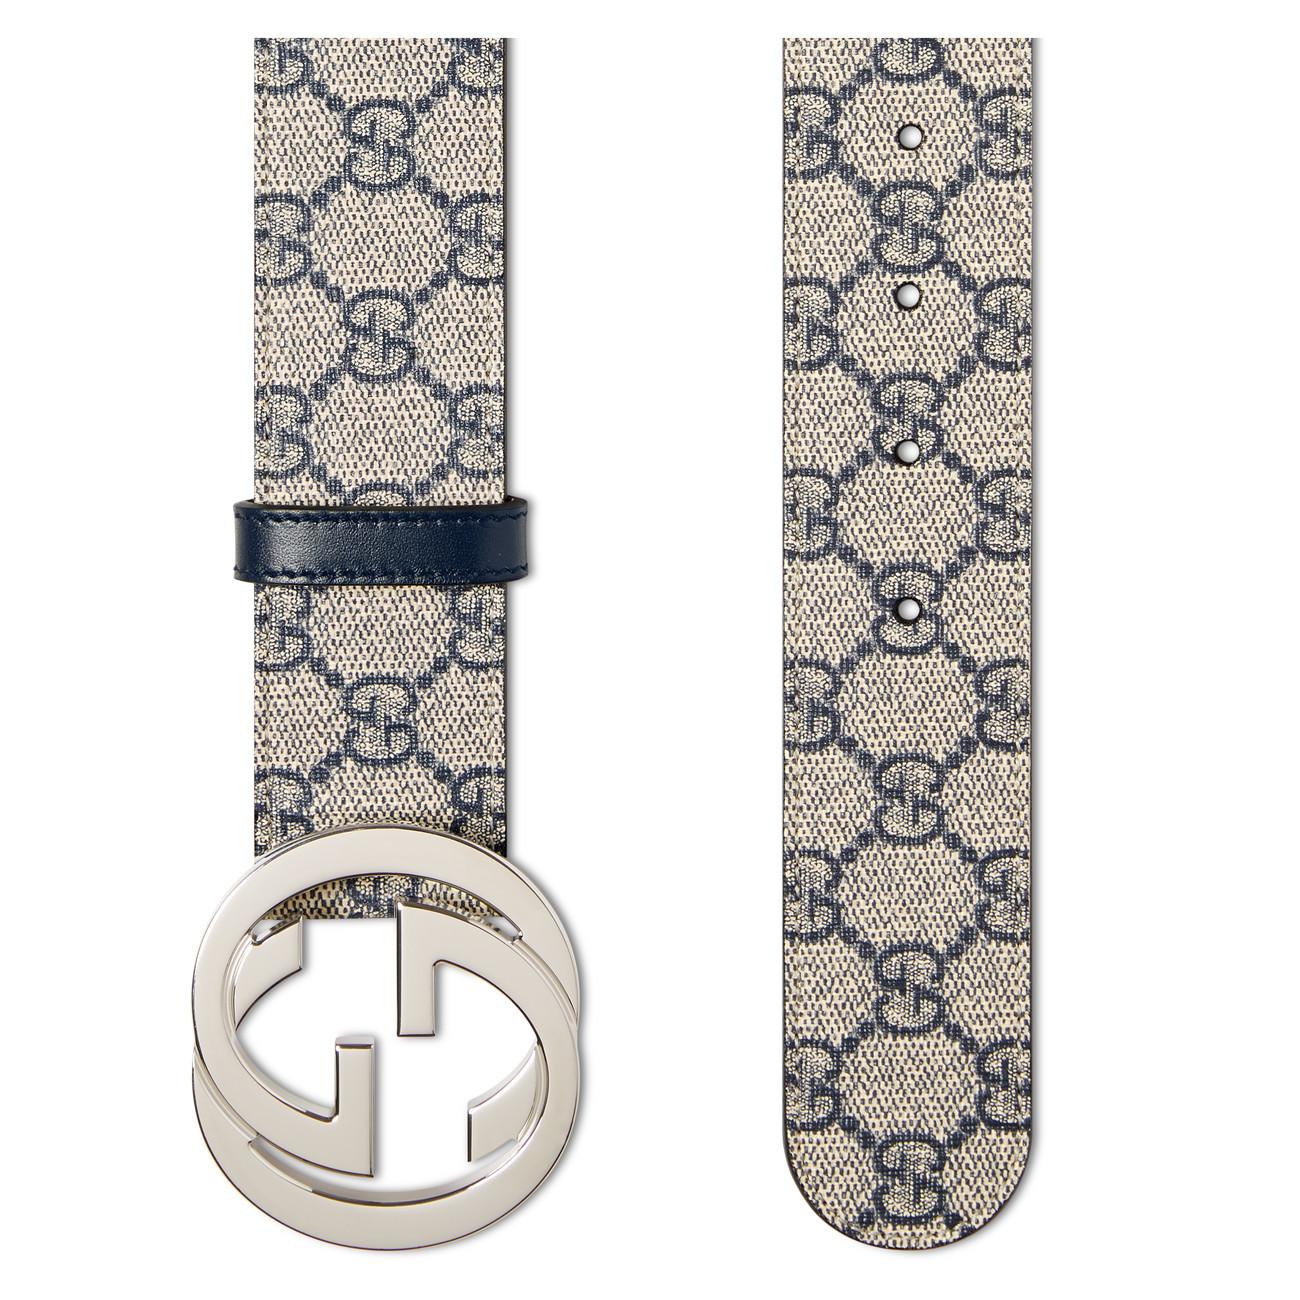 Gucci Canvas GG Supreme Belt With G Buckle in Blue for Men - Lyst